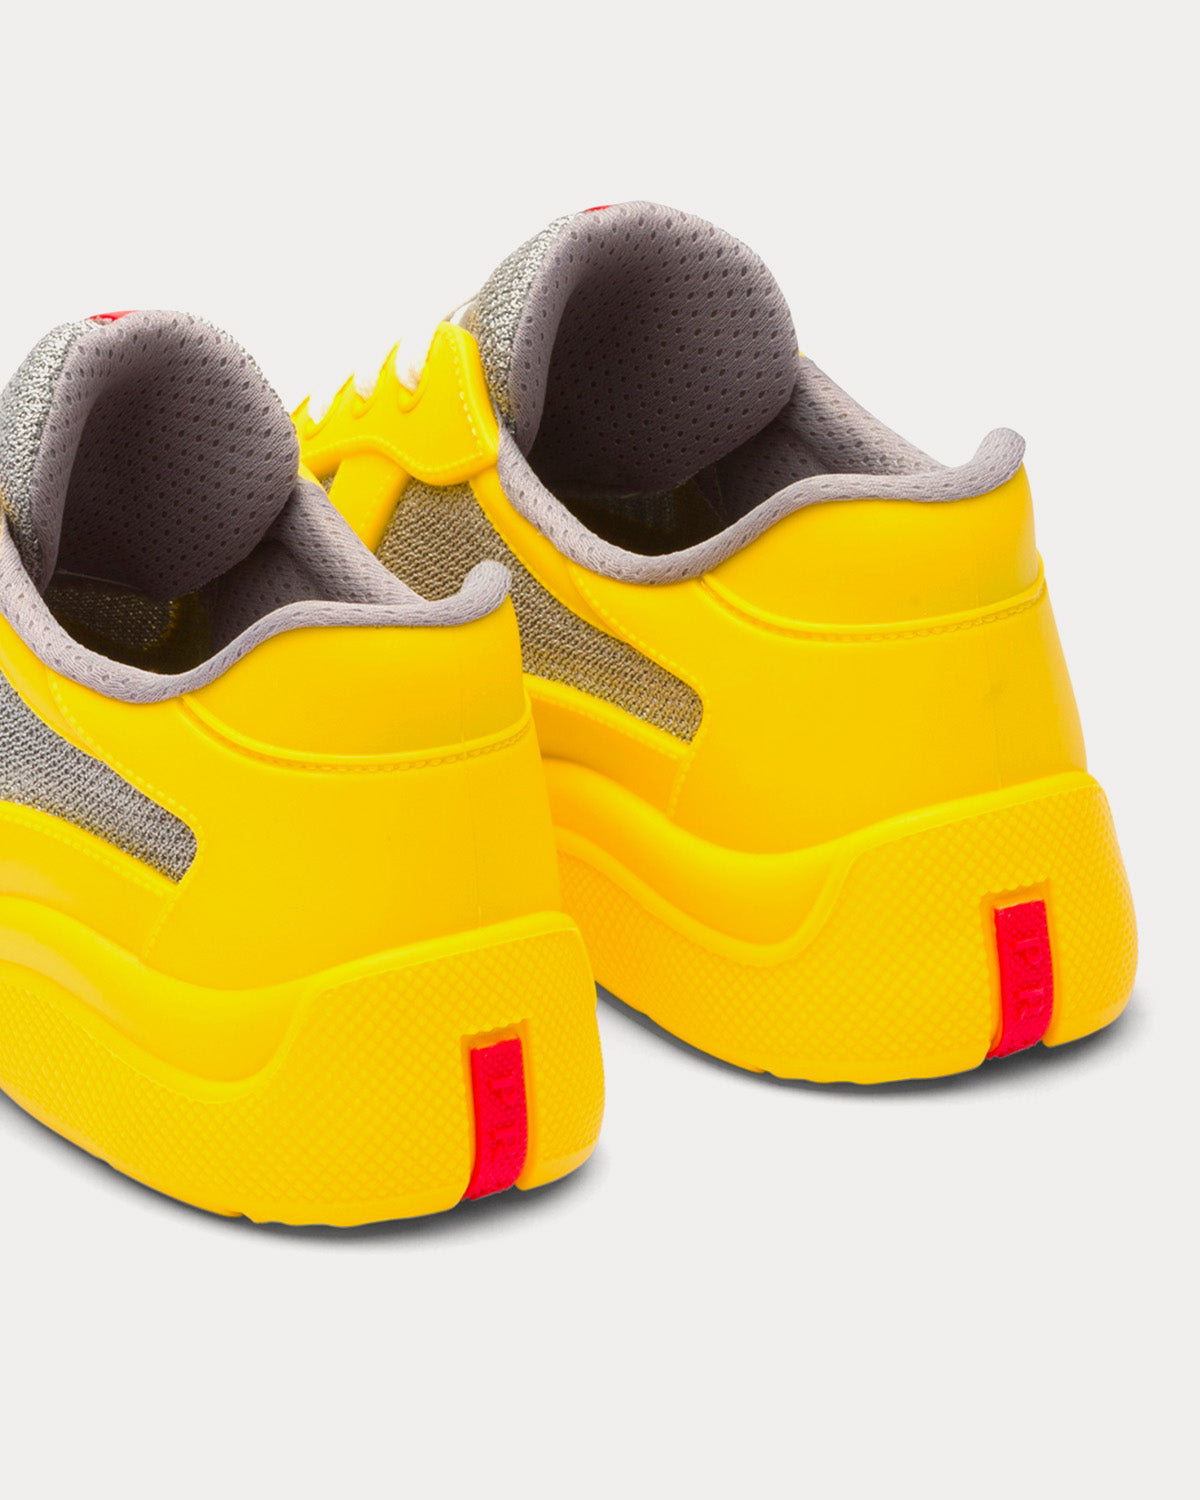 Prada - America's Cup Soft Rubber & Bike Fabric Sunny Yellow Low Top Sneakers